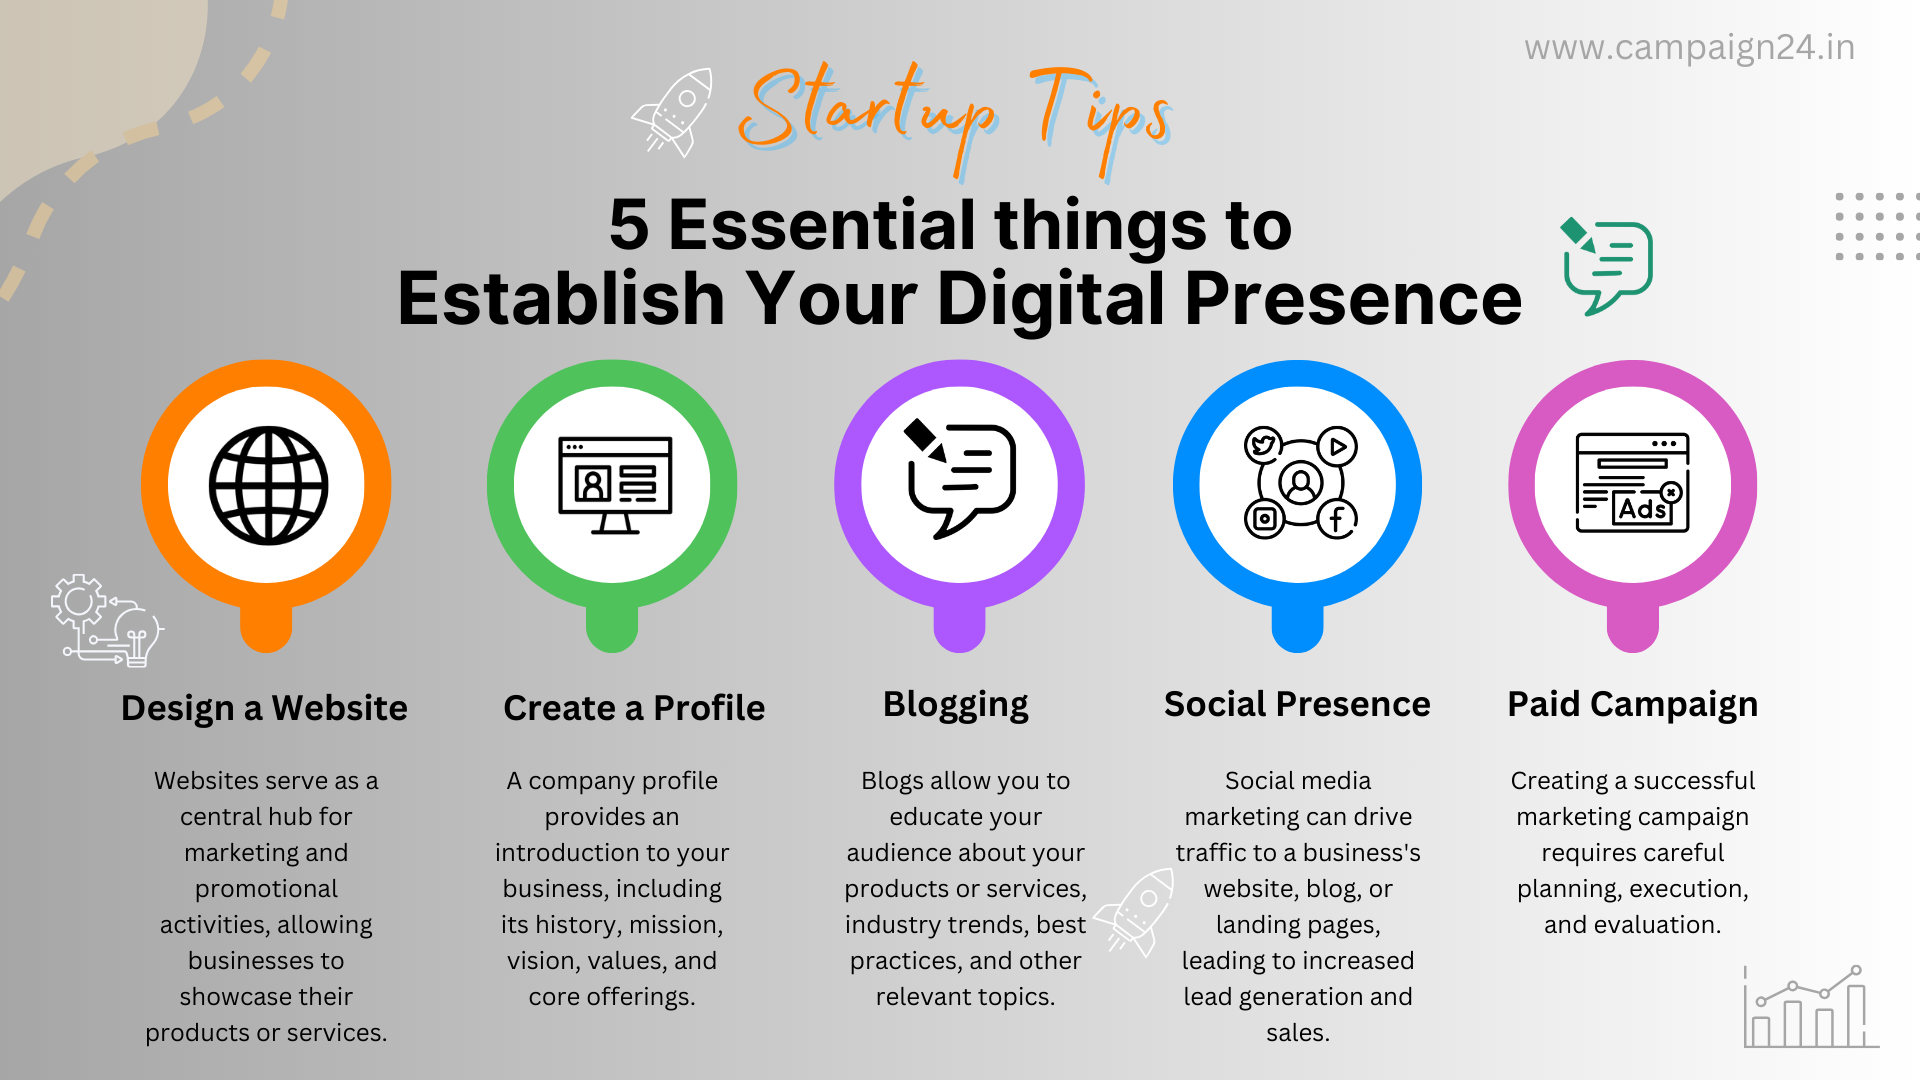 5 Essential things to do for Digital Presence of a startup